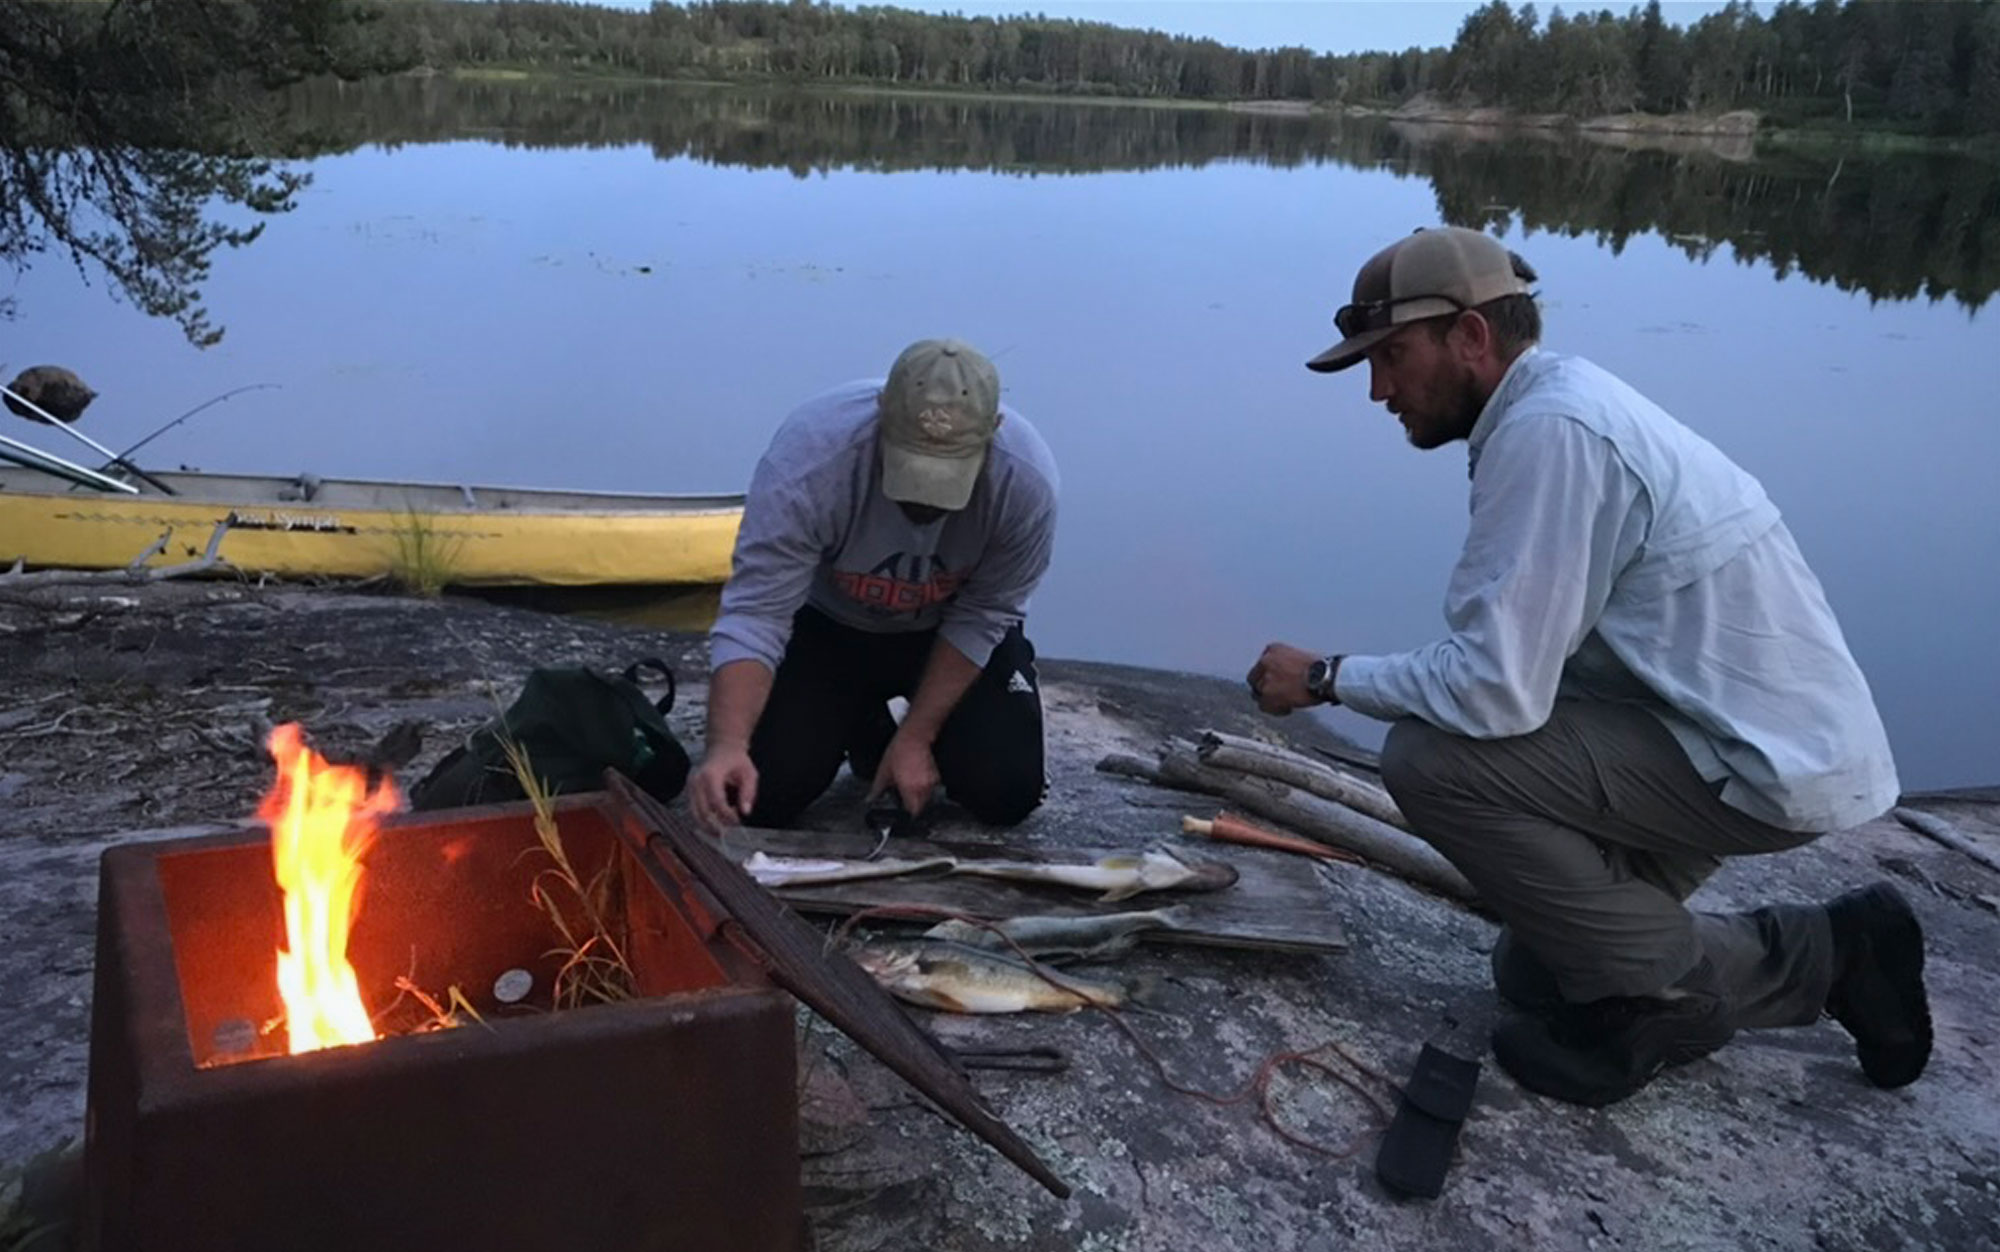 Campers grill walleye in the backcountry.